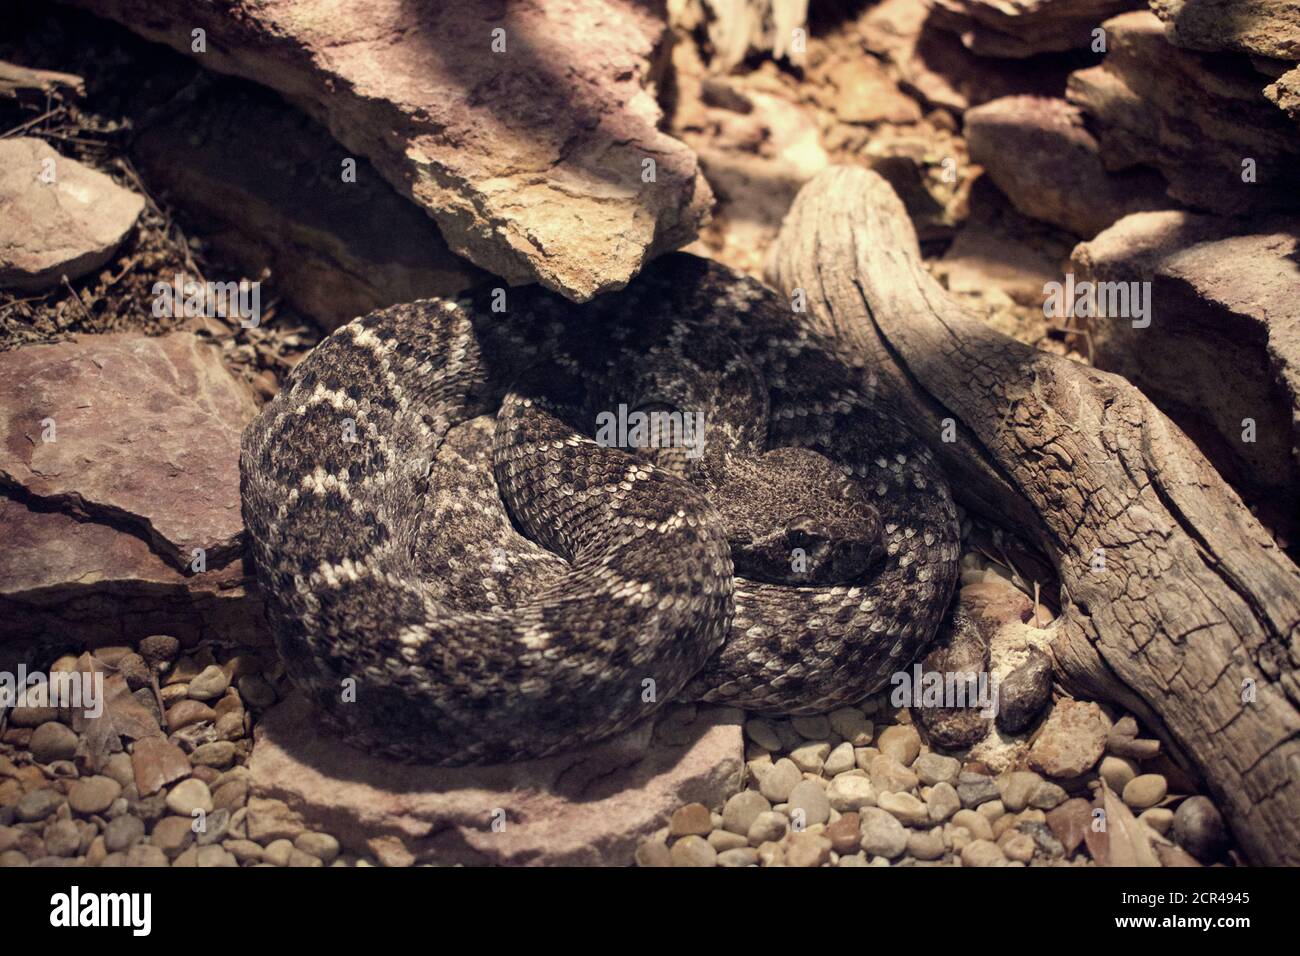 Close up on a coiled rattlesnake in a zoo enclosure Stock Photo